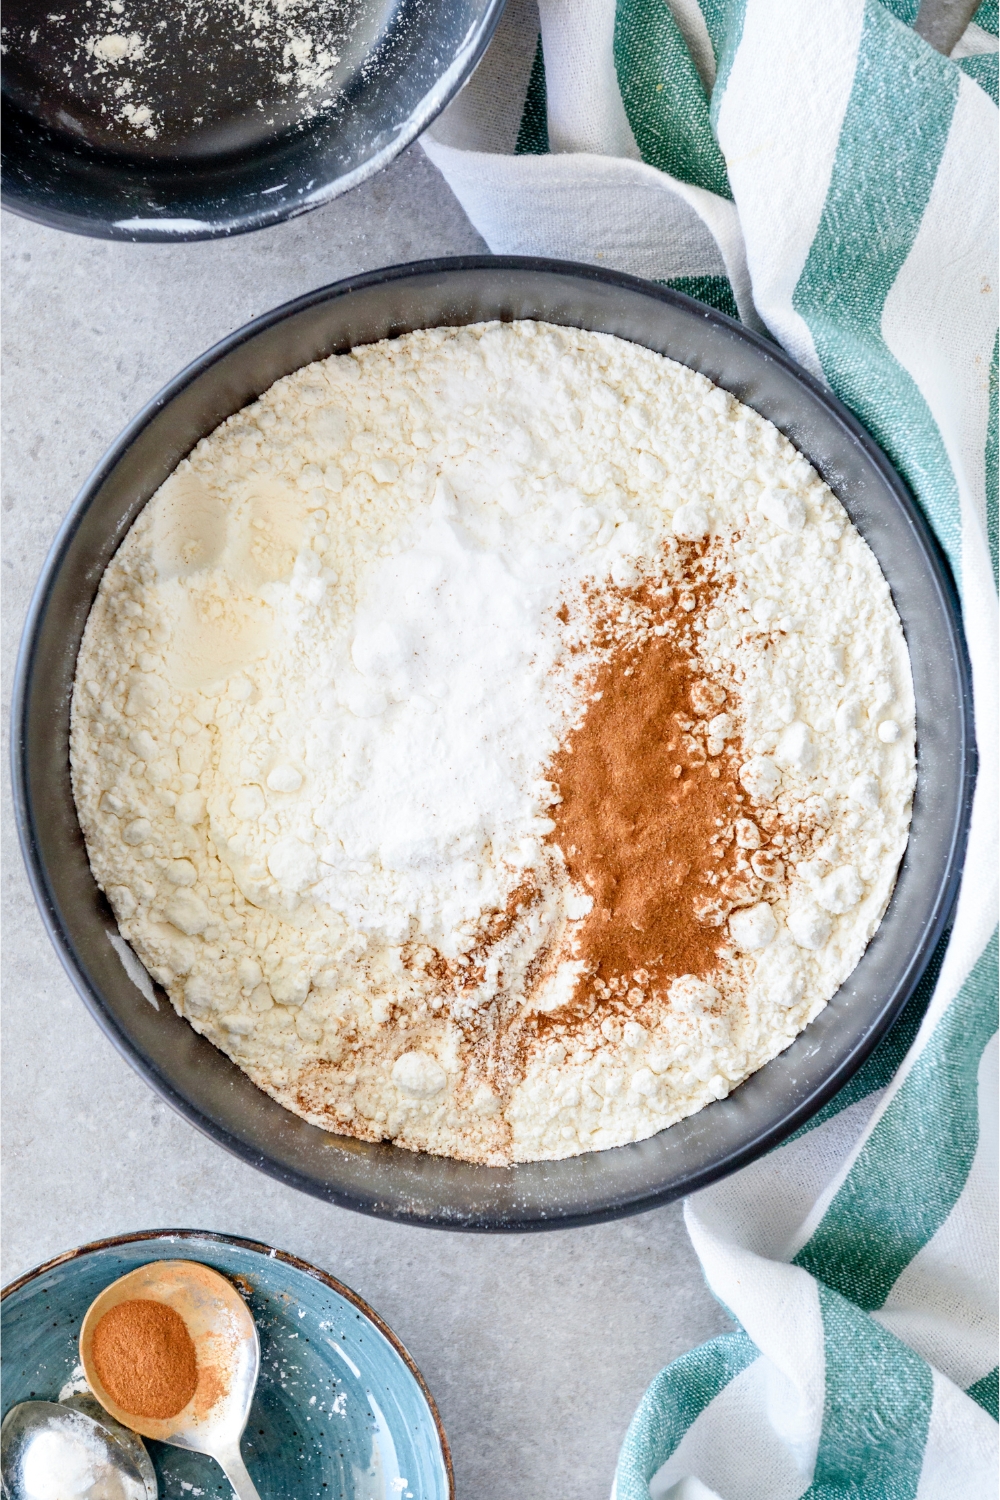 A bowl filled with flour, cinnamon, and baking powder.